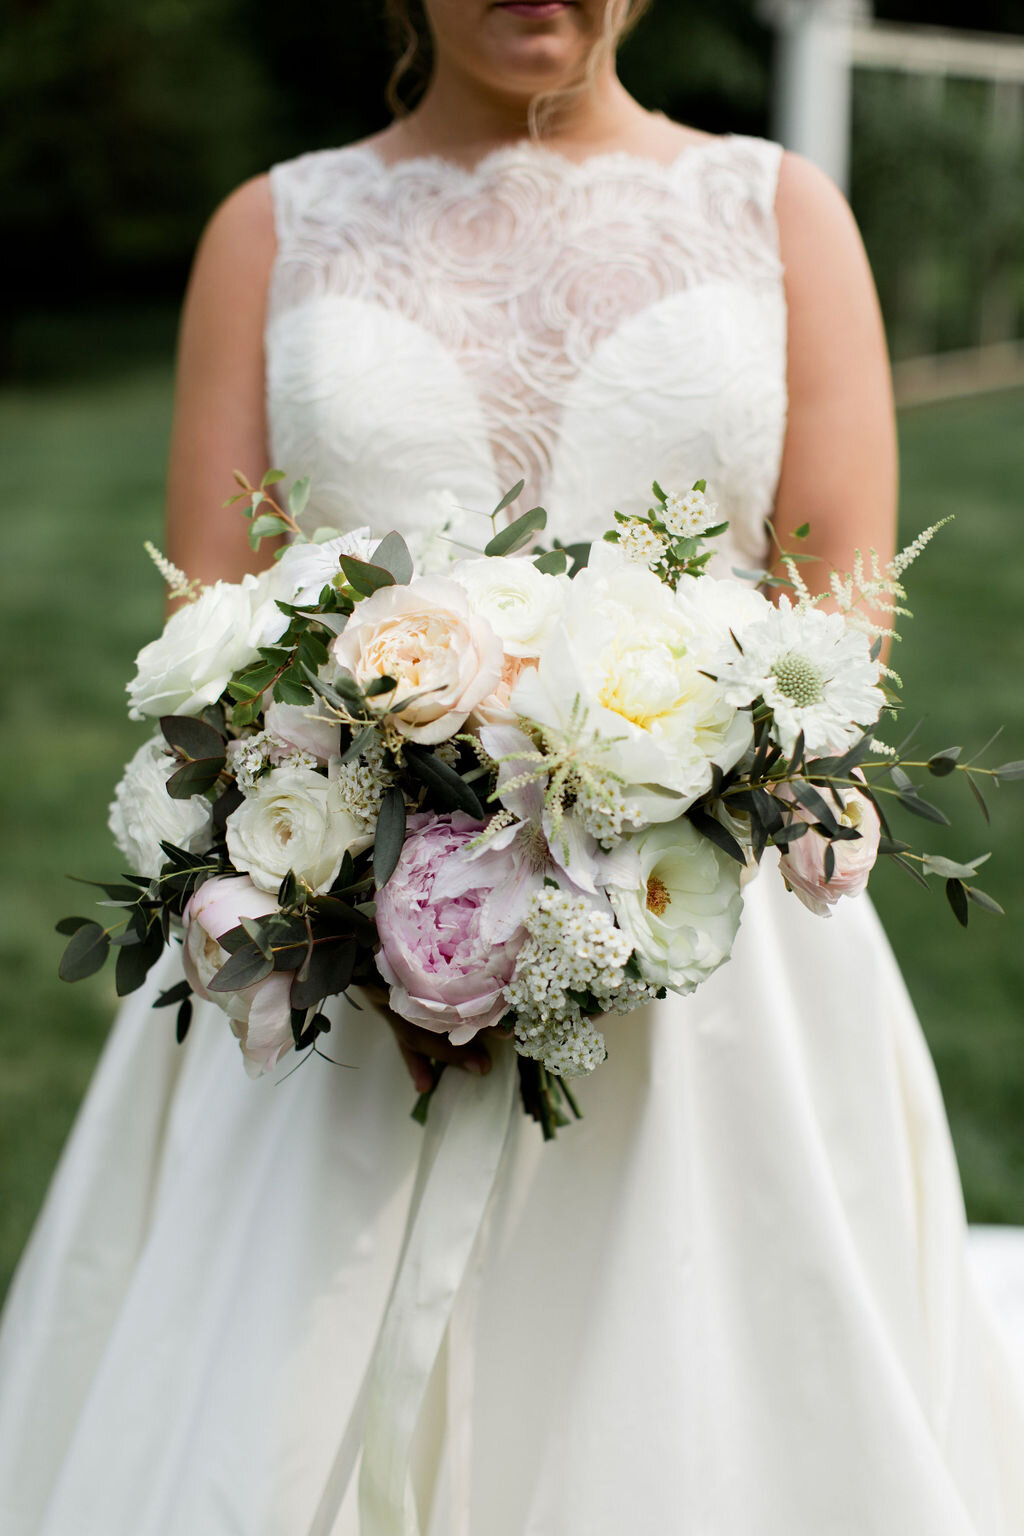 A bride holding a bouquet for her wedding day